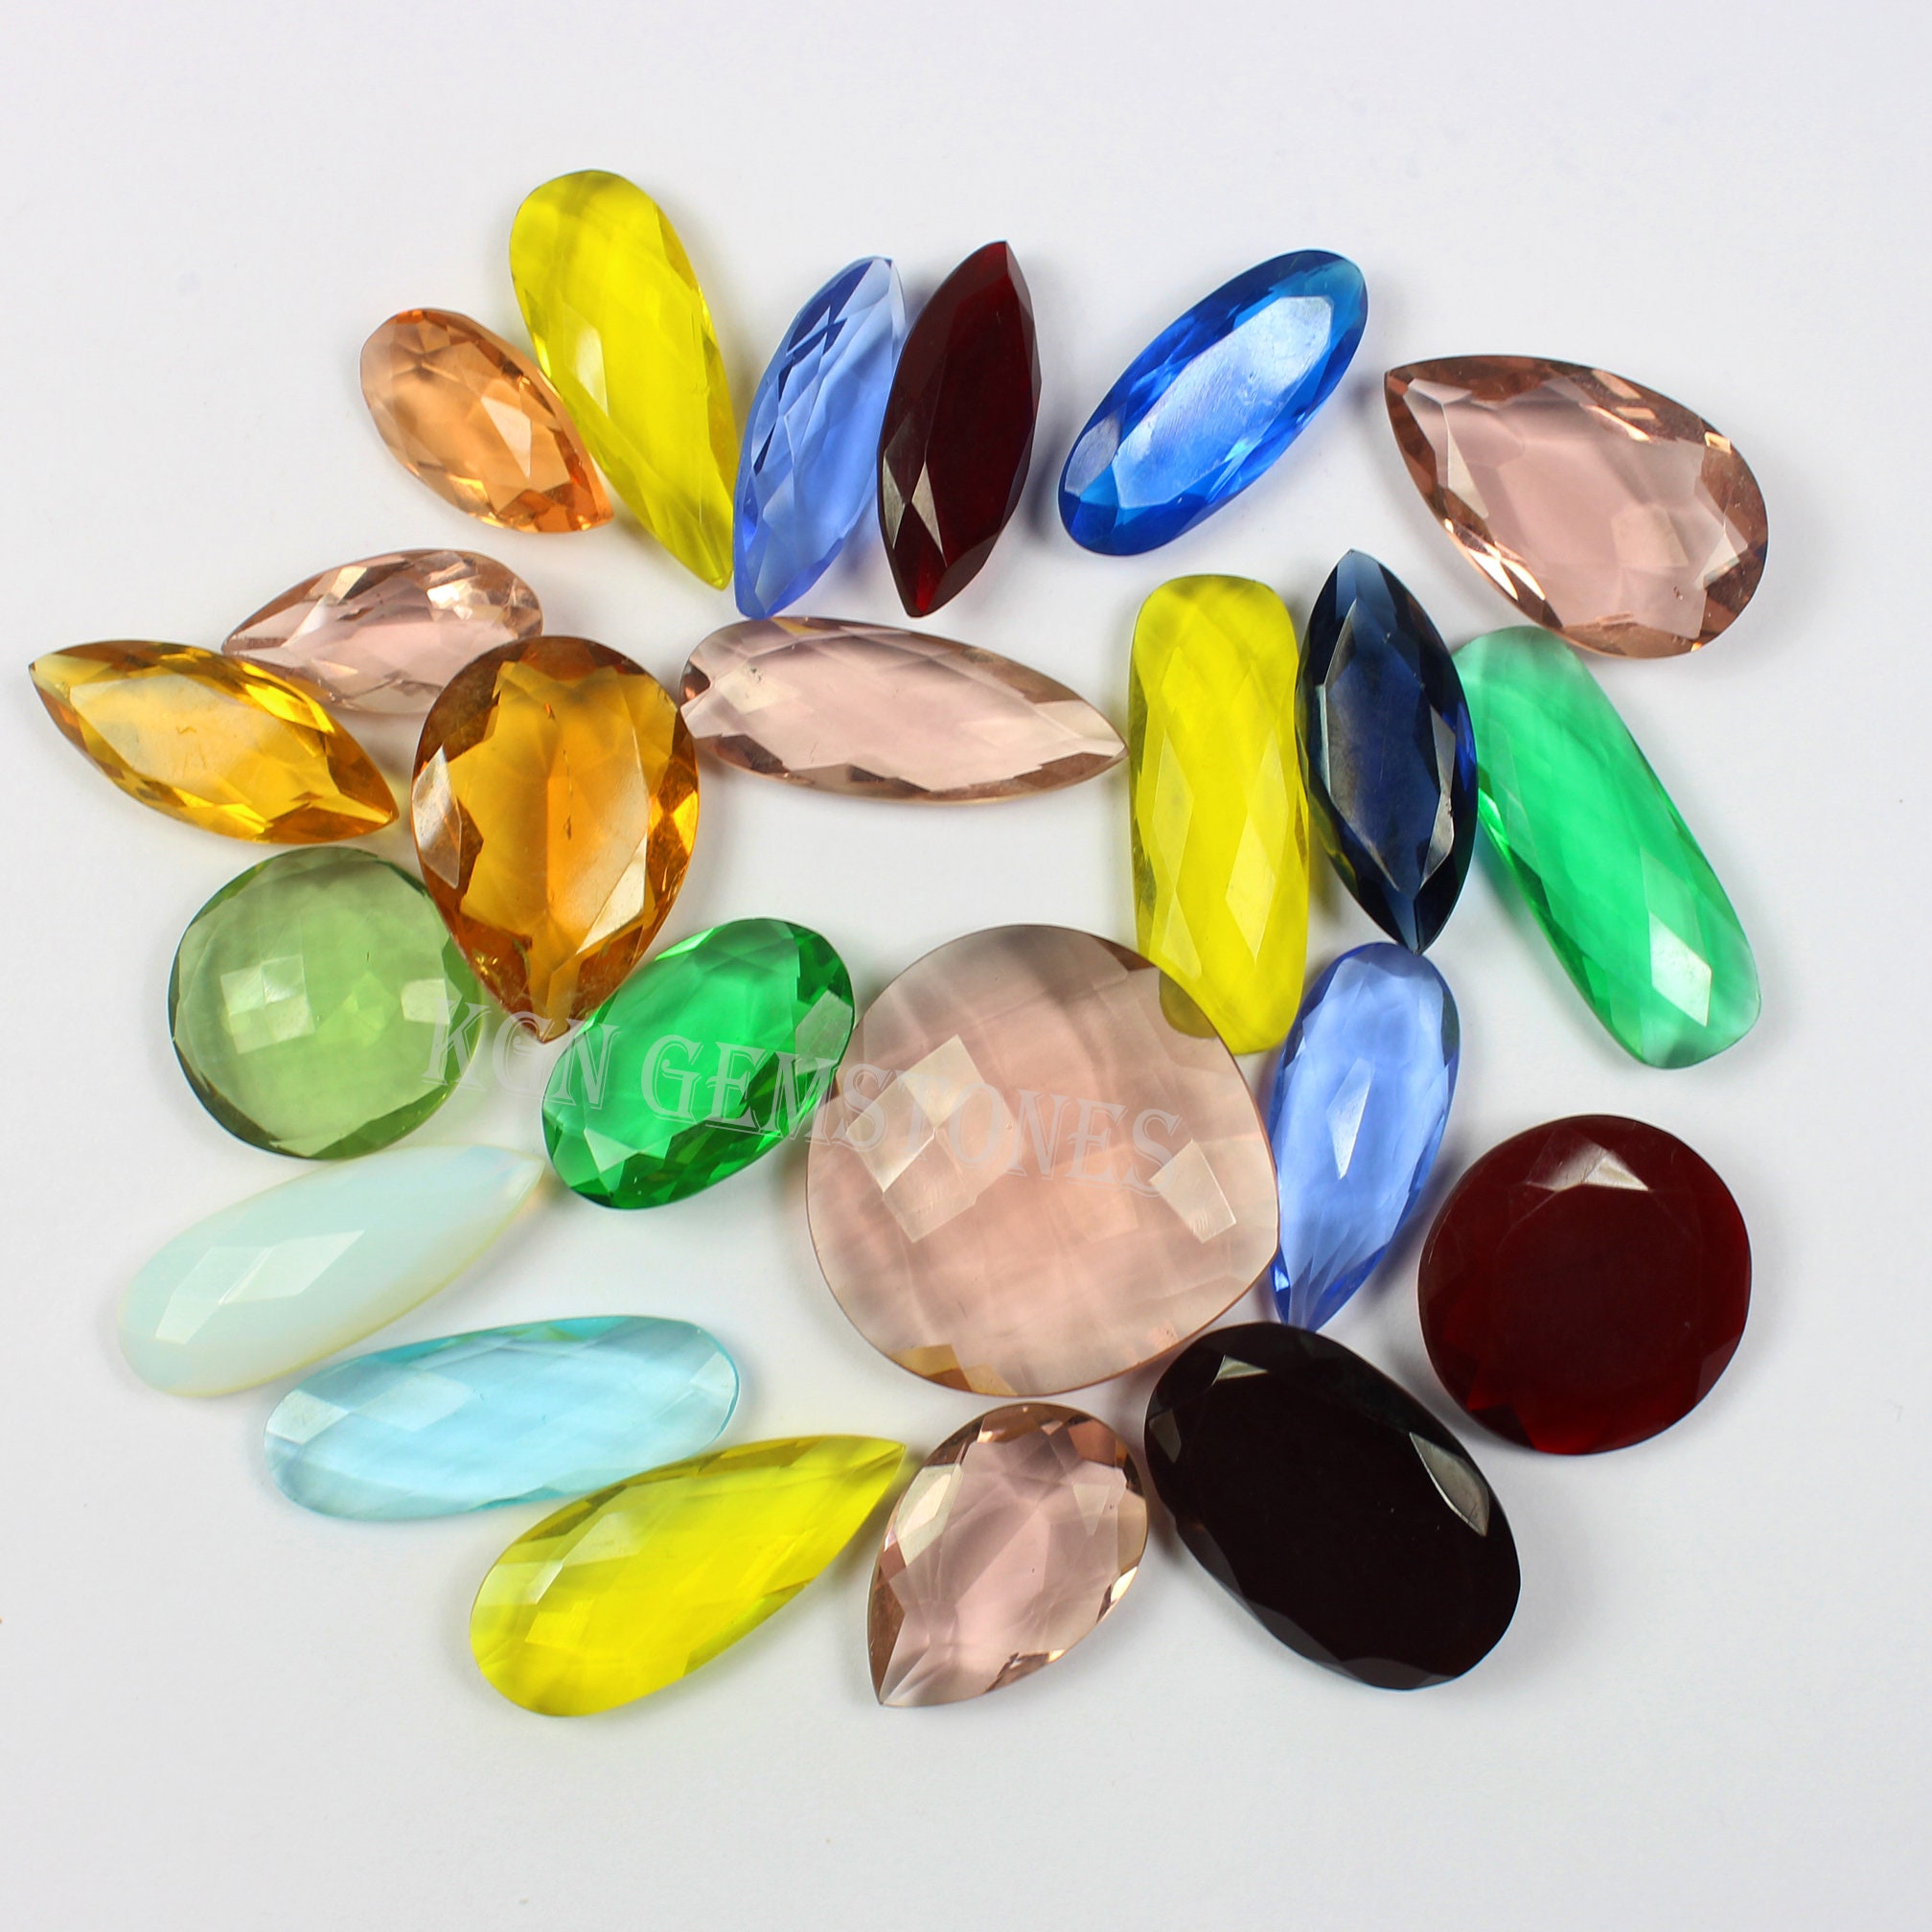 Glass Gemstones: Value, Price, and Jewelry Information - Gem Society